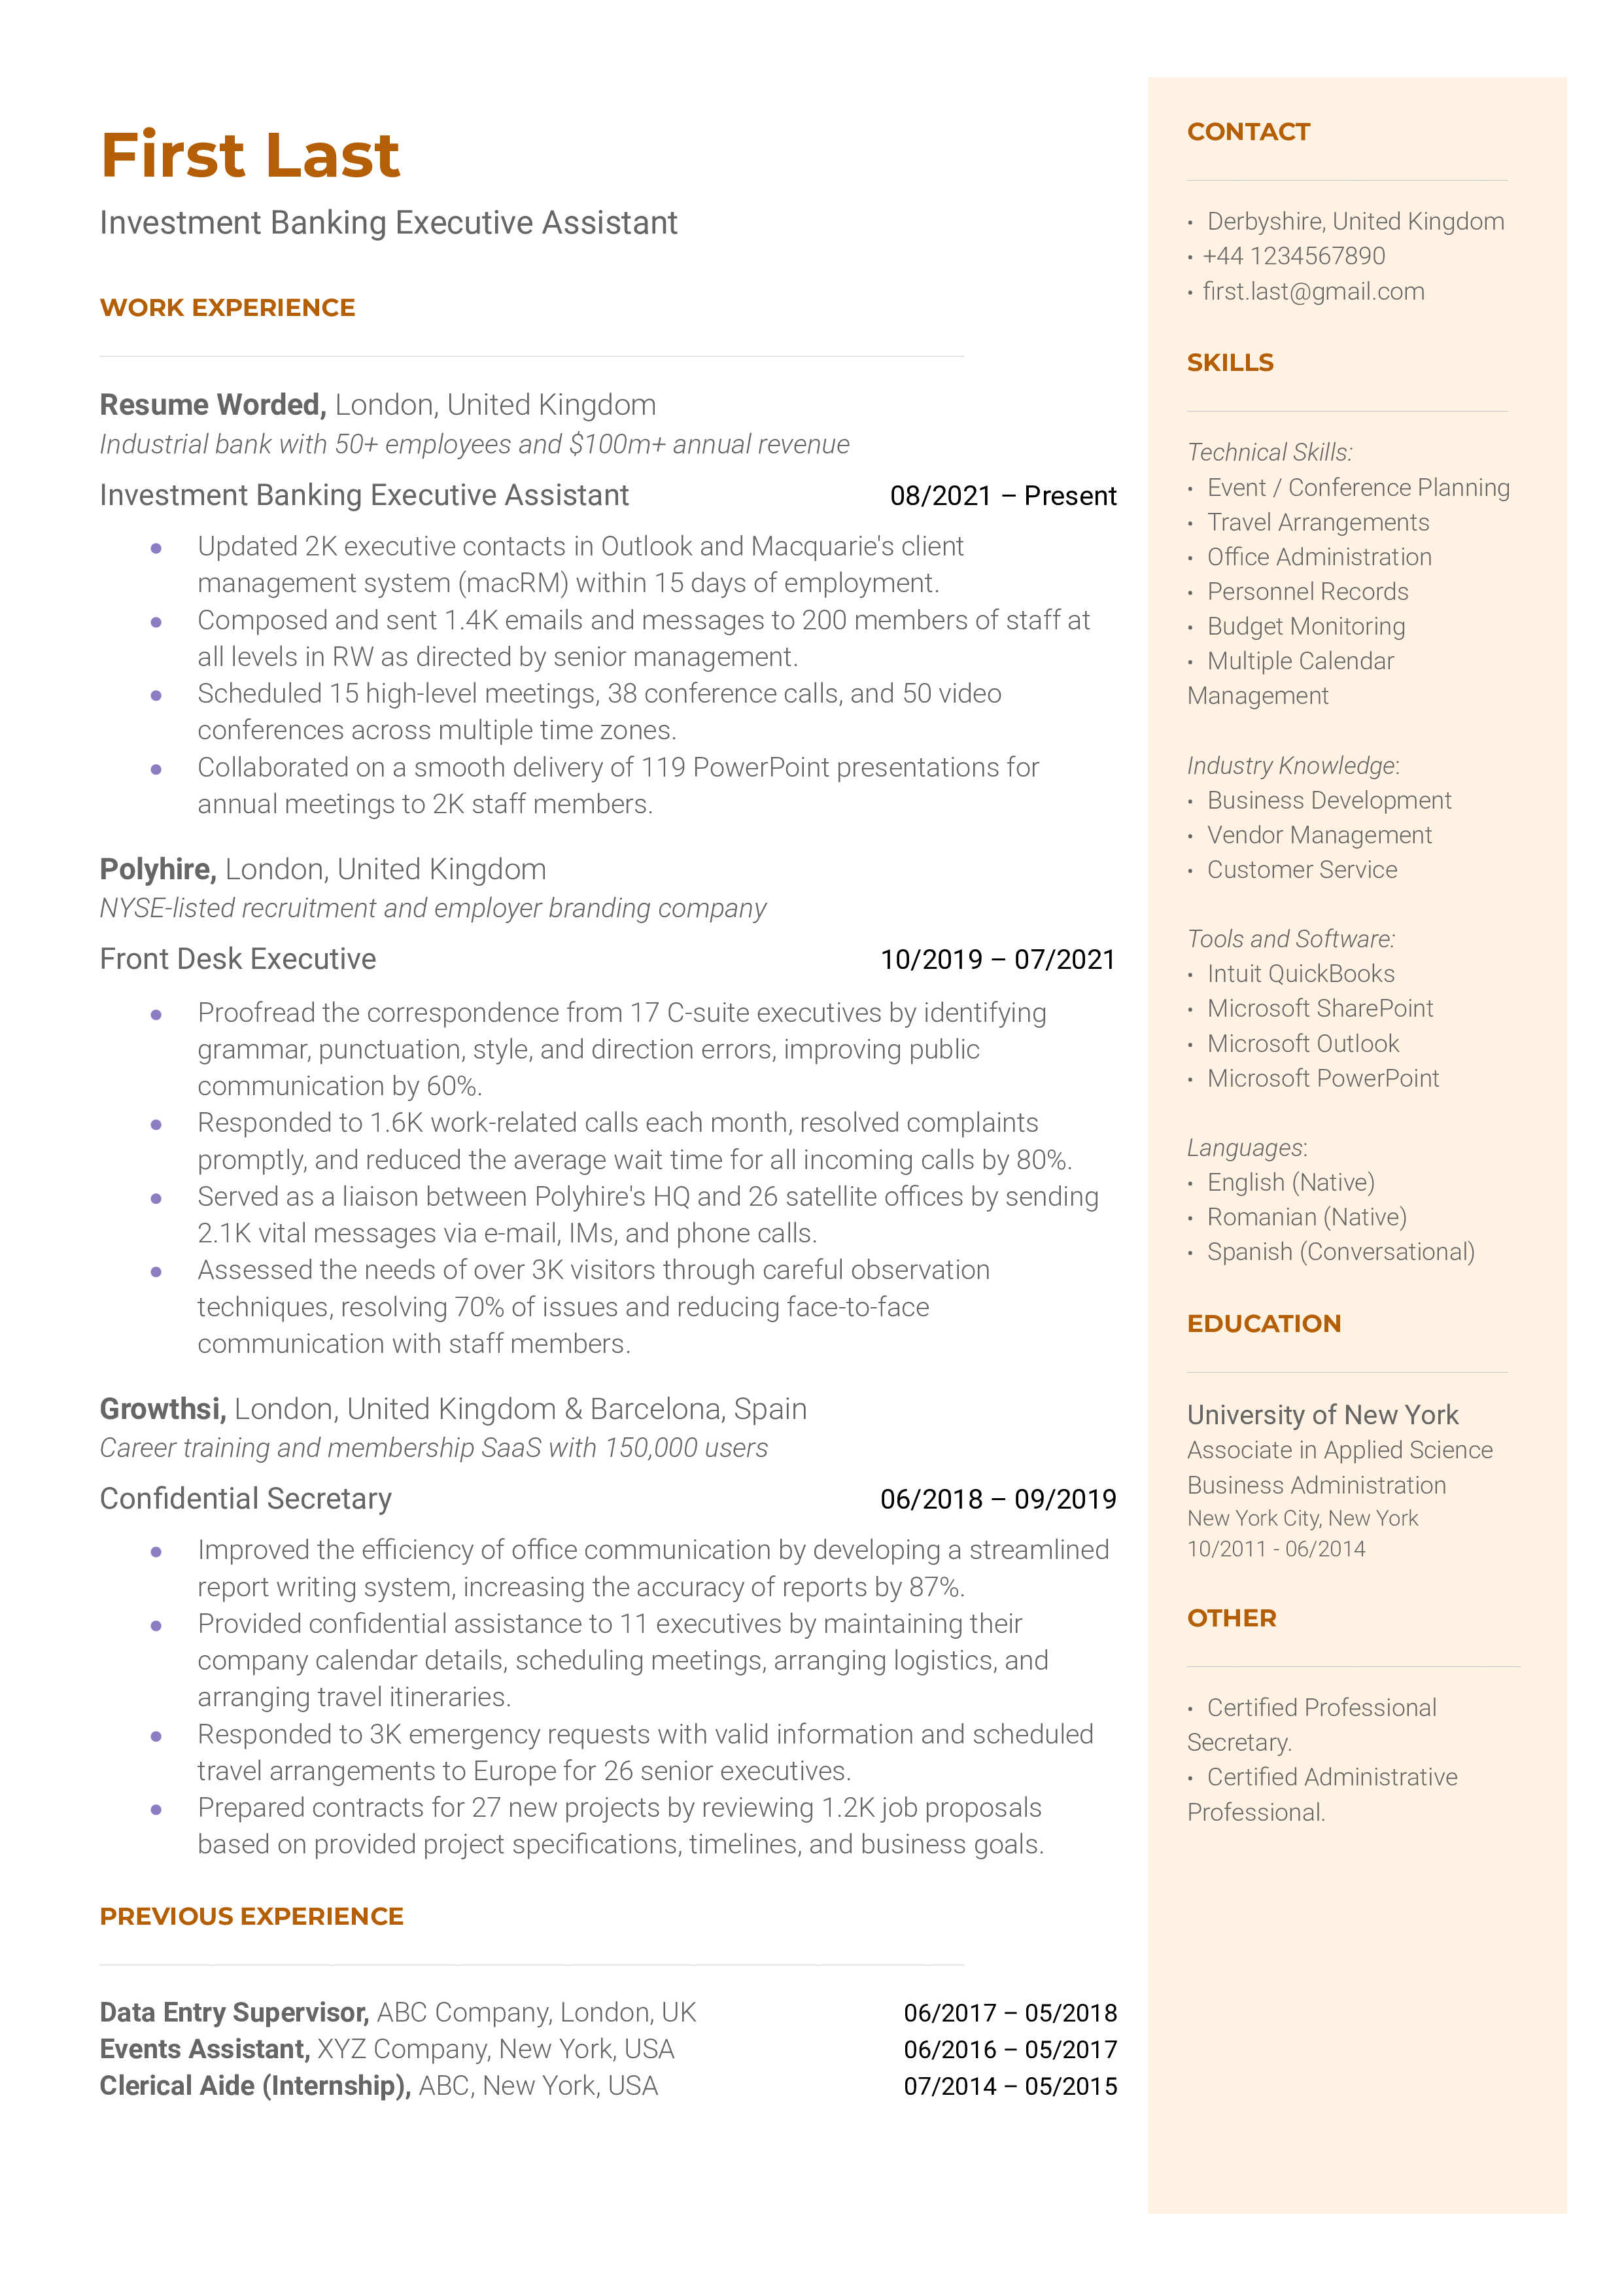 An investment banking executive assistant resume sample highlighting the applicant’s administrative strengths and certifications.